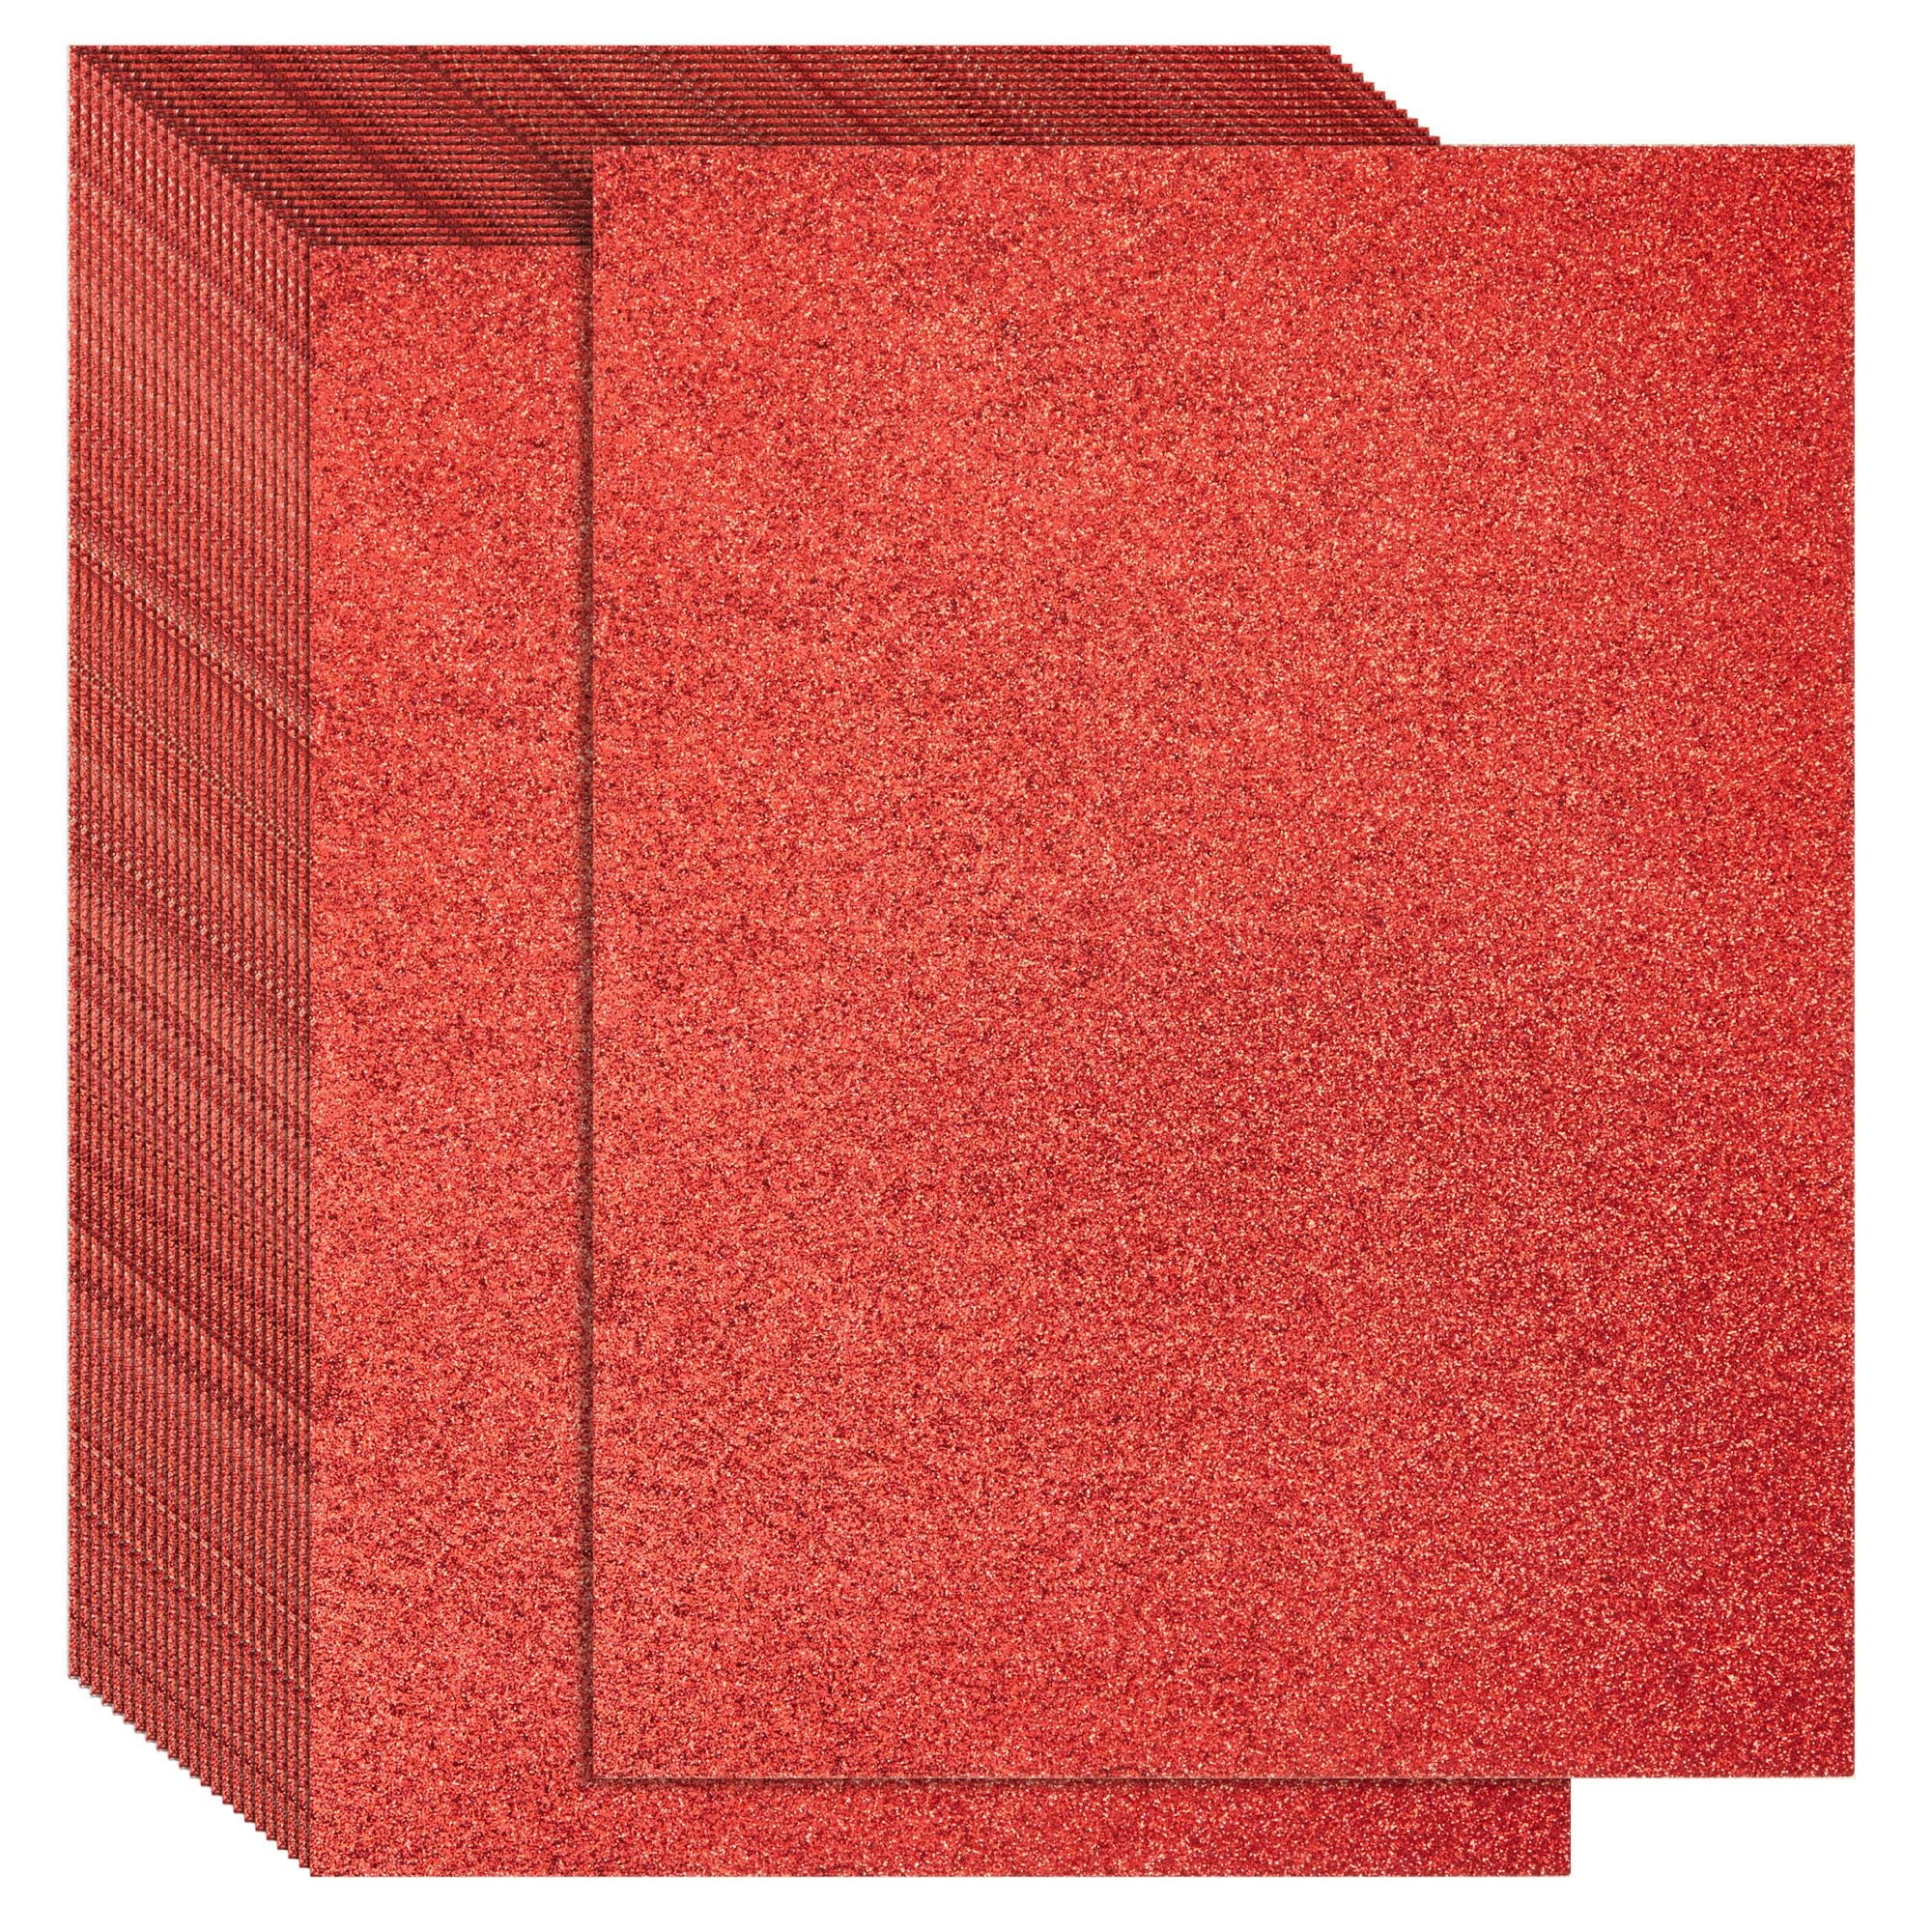 Wholesale Cardstock Paper Suppliers - Search Shopping